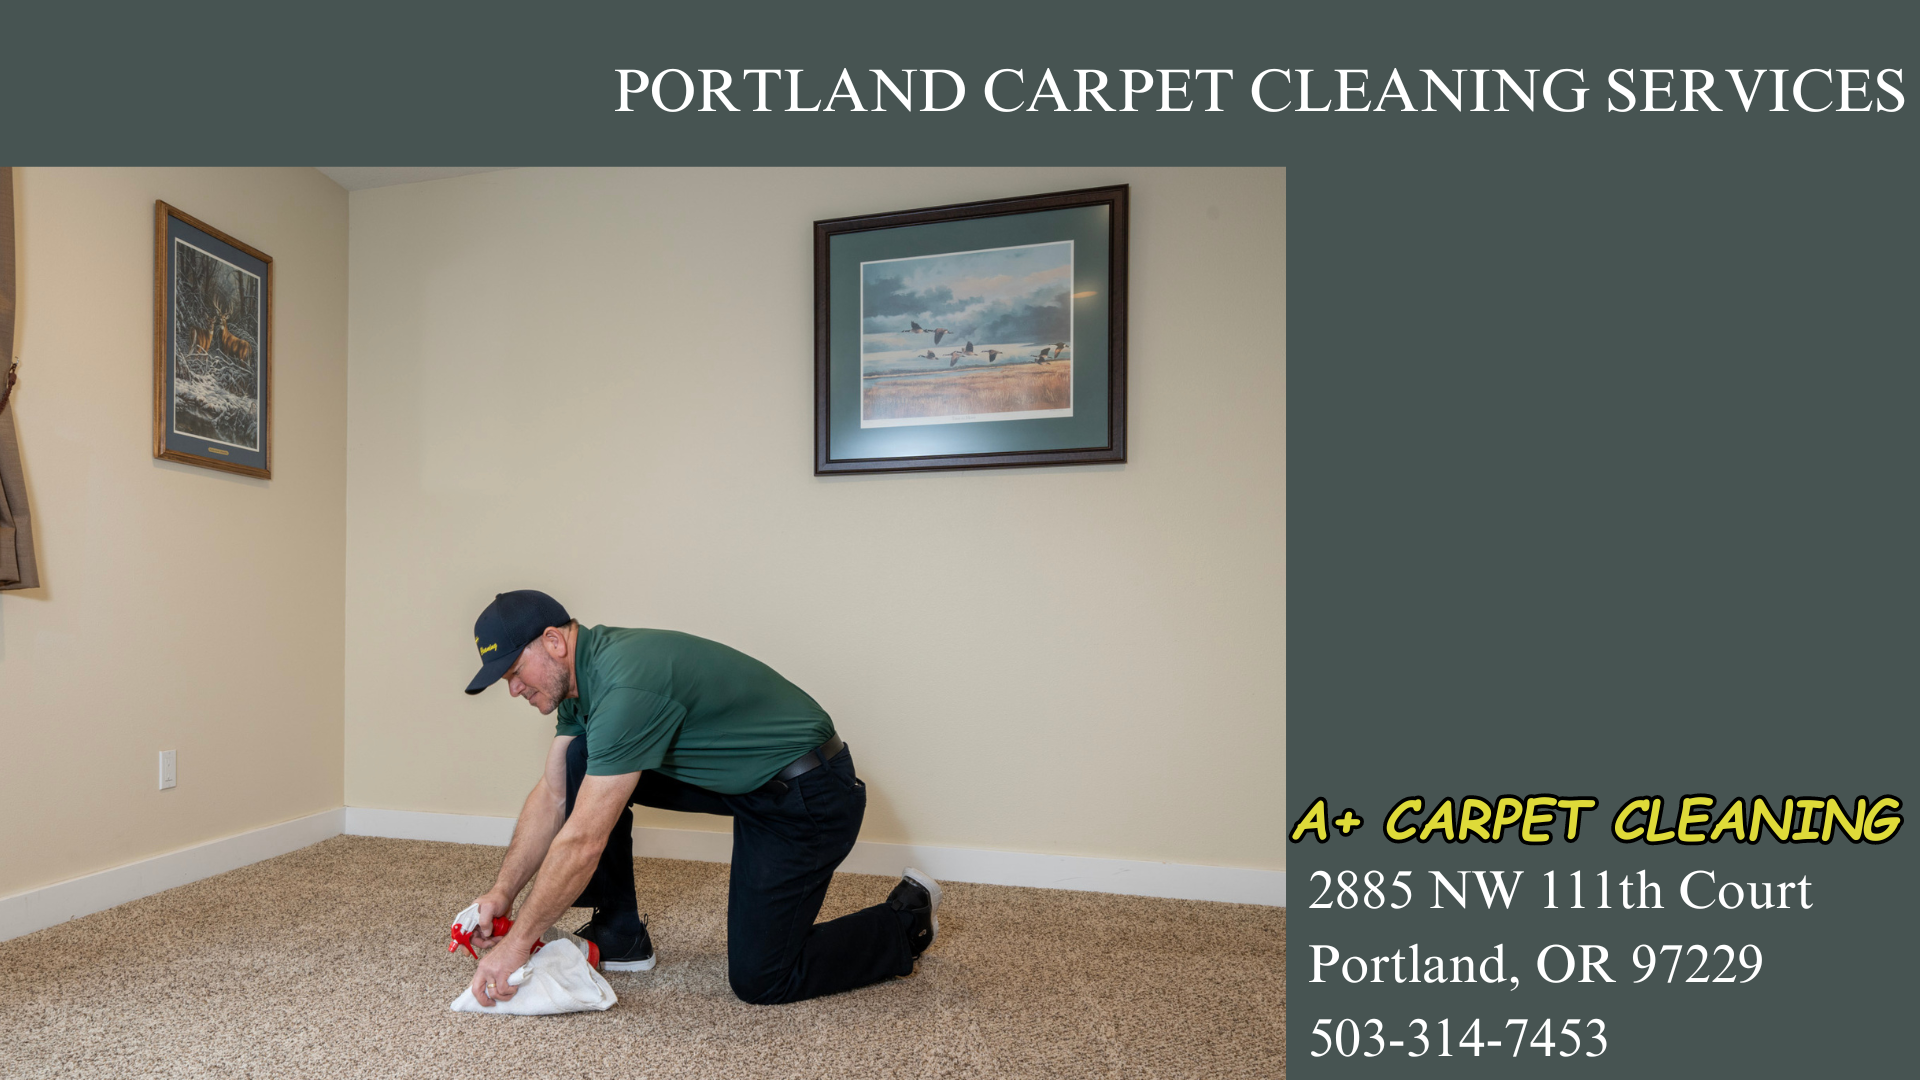 Portland carpet cleaning services near me